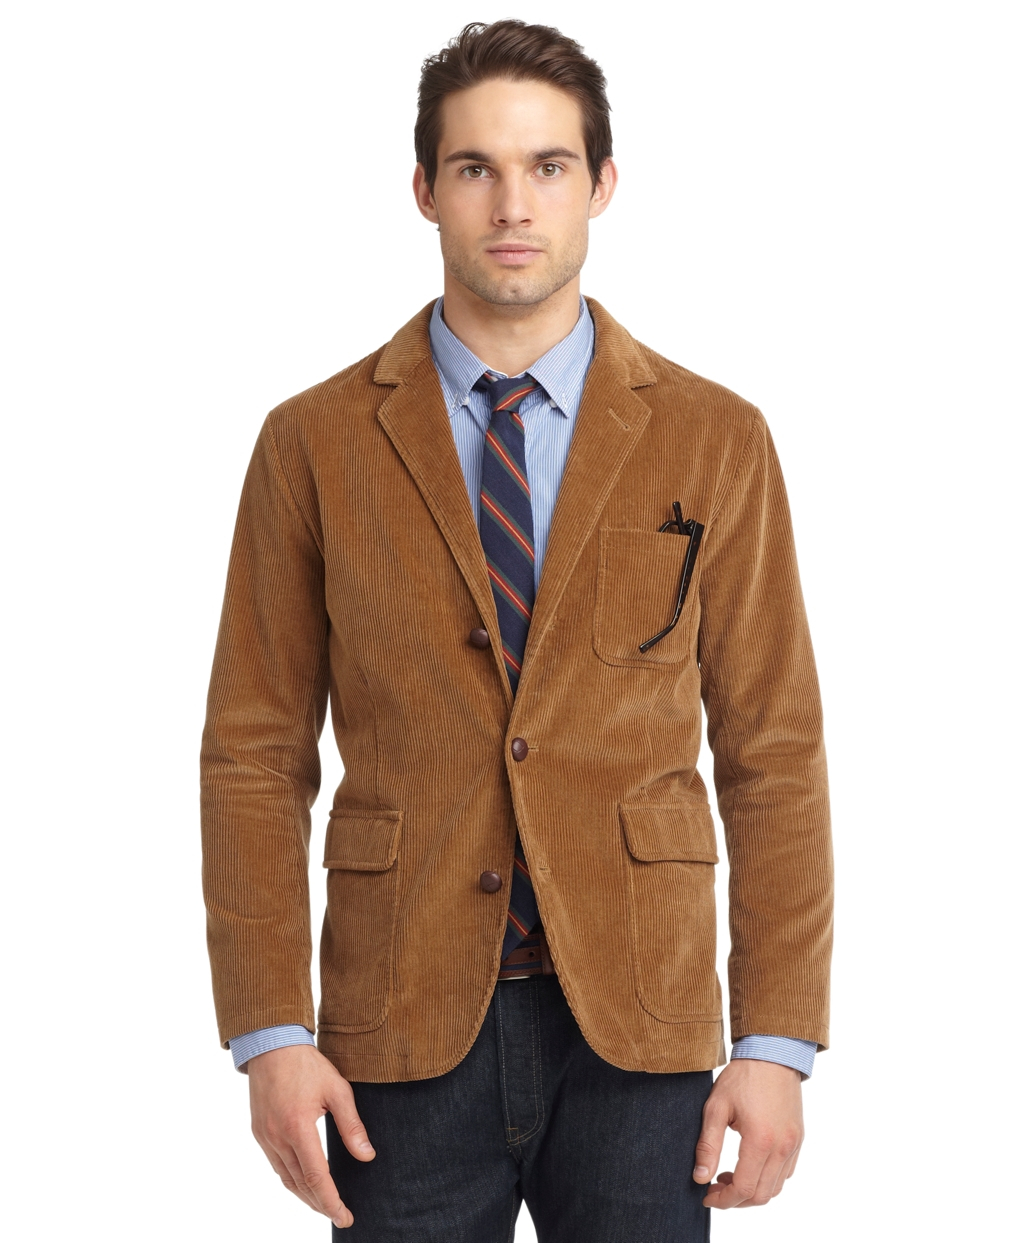 Lyst - Brooks brothers Corduroy Blazer in Brown for Men